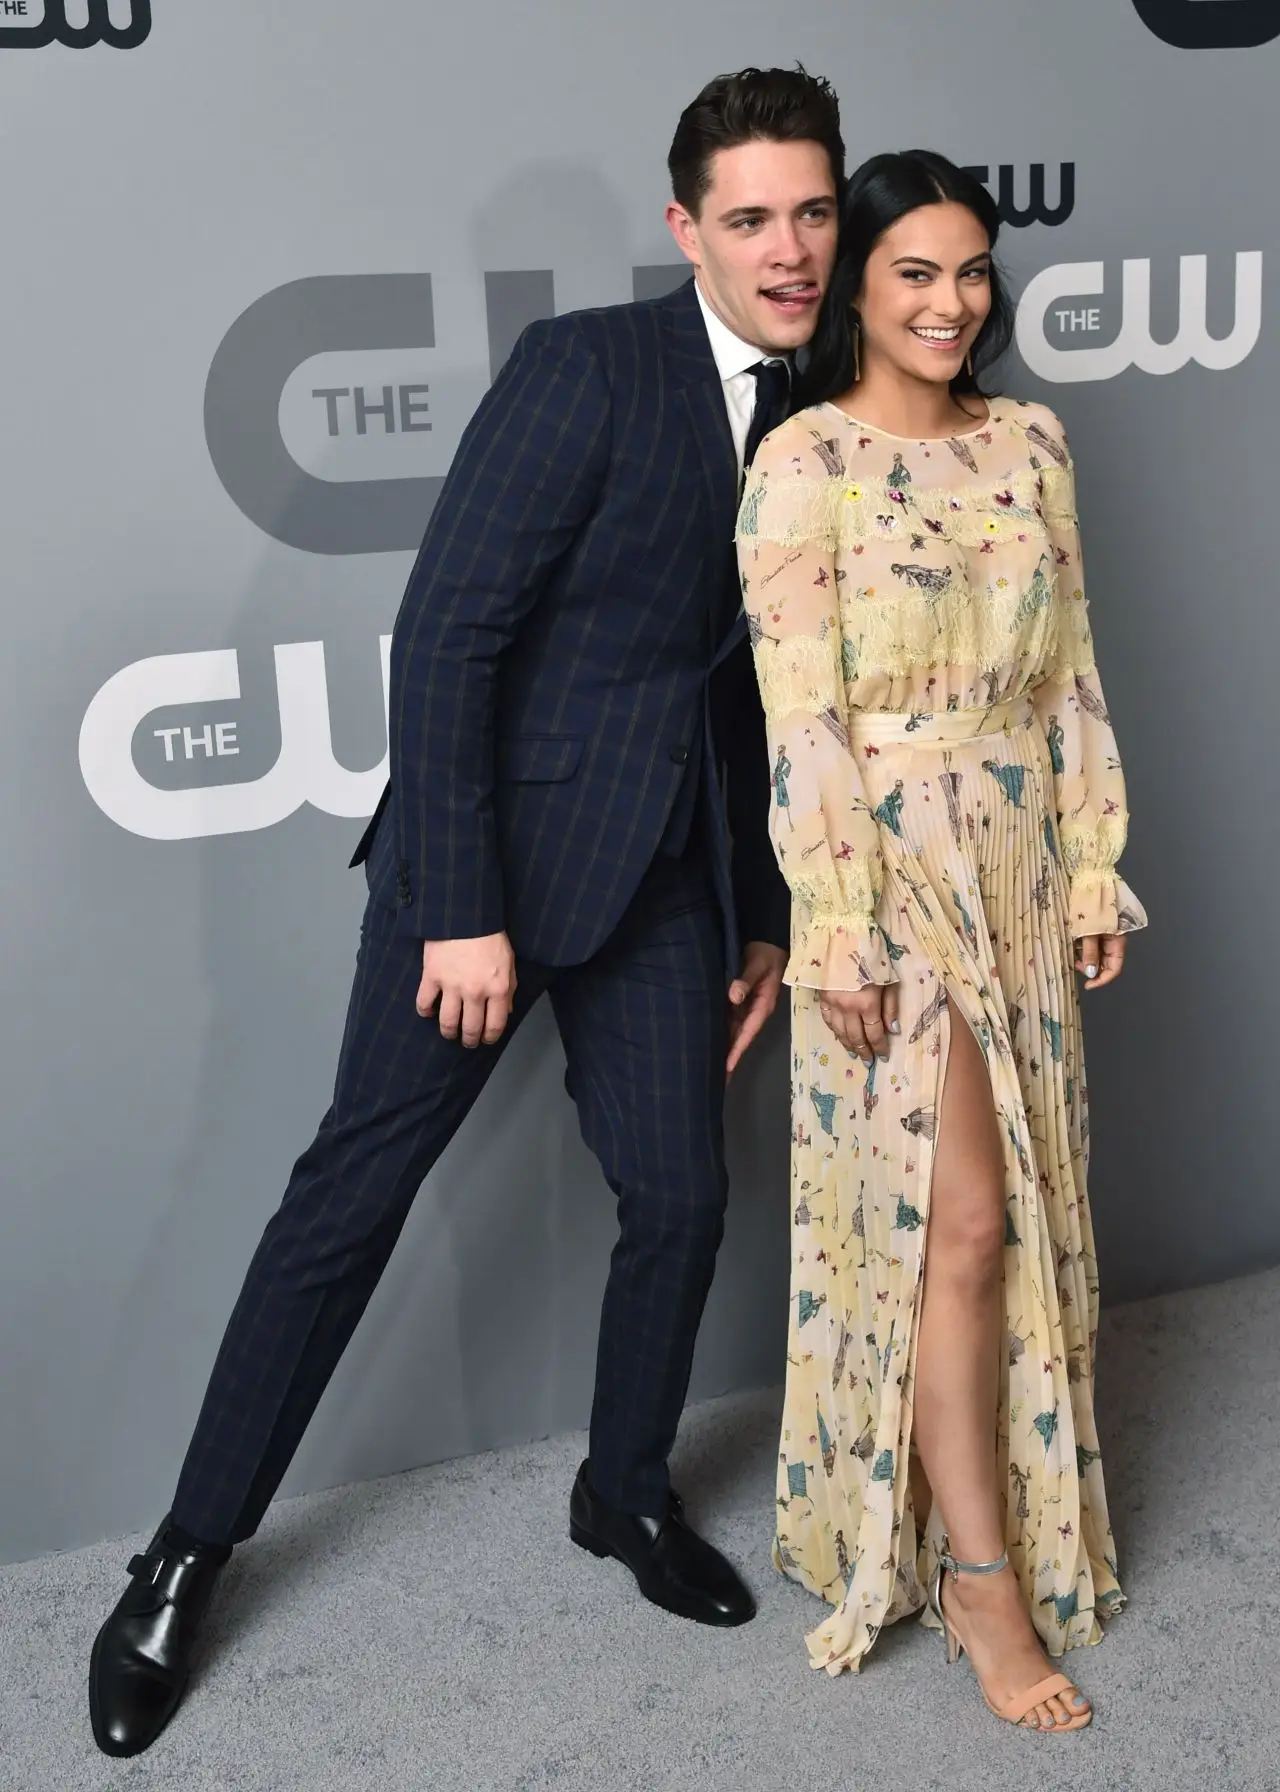 CAMILA MENDES AT CW NETWORK UPFRONT PRESENTATION IN NEW YORK CITY6